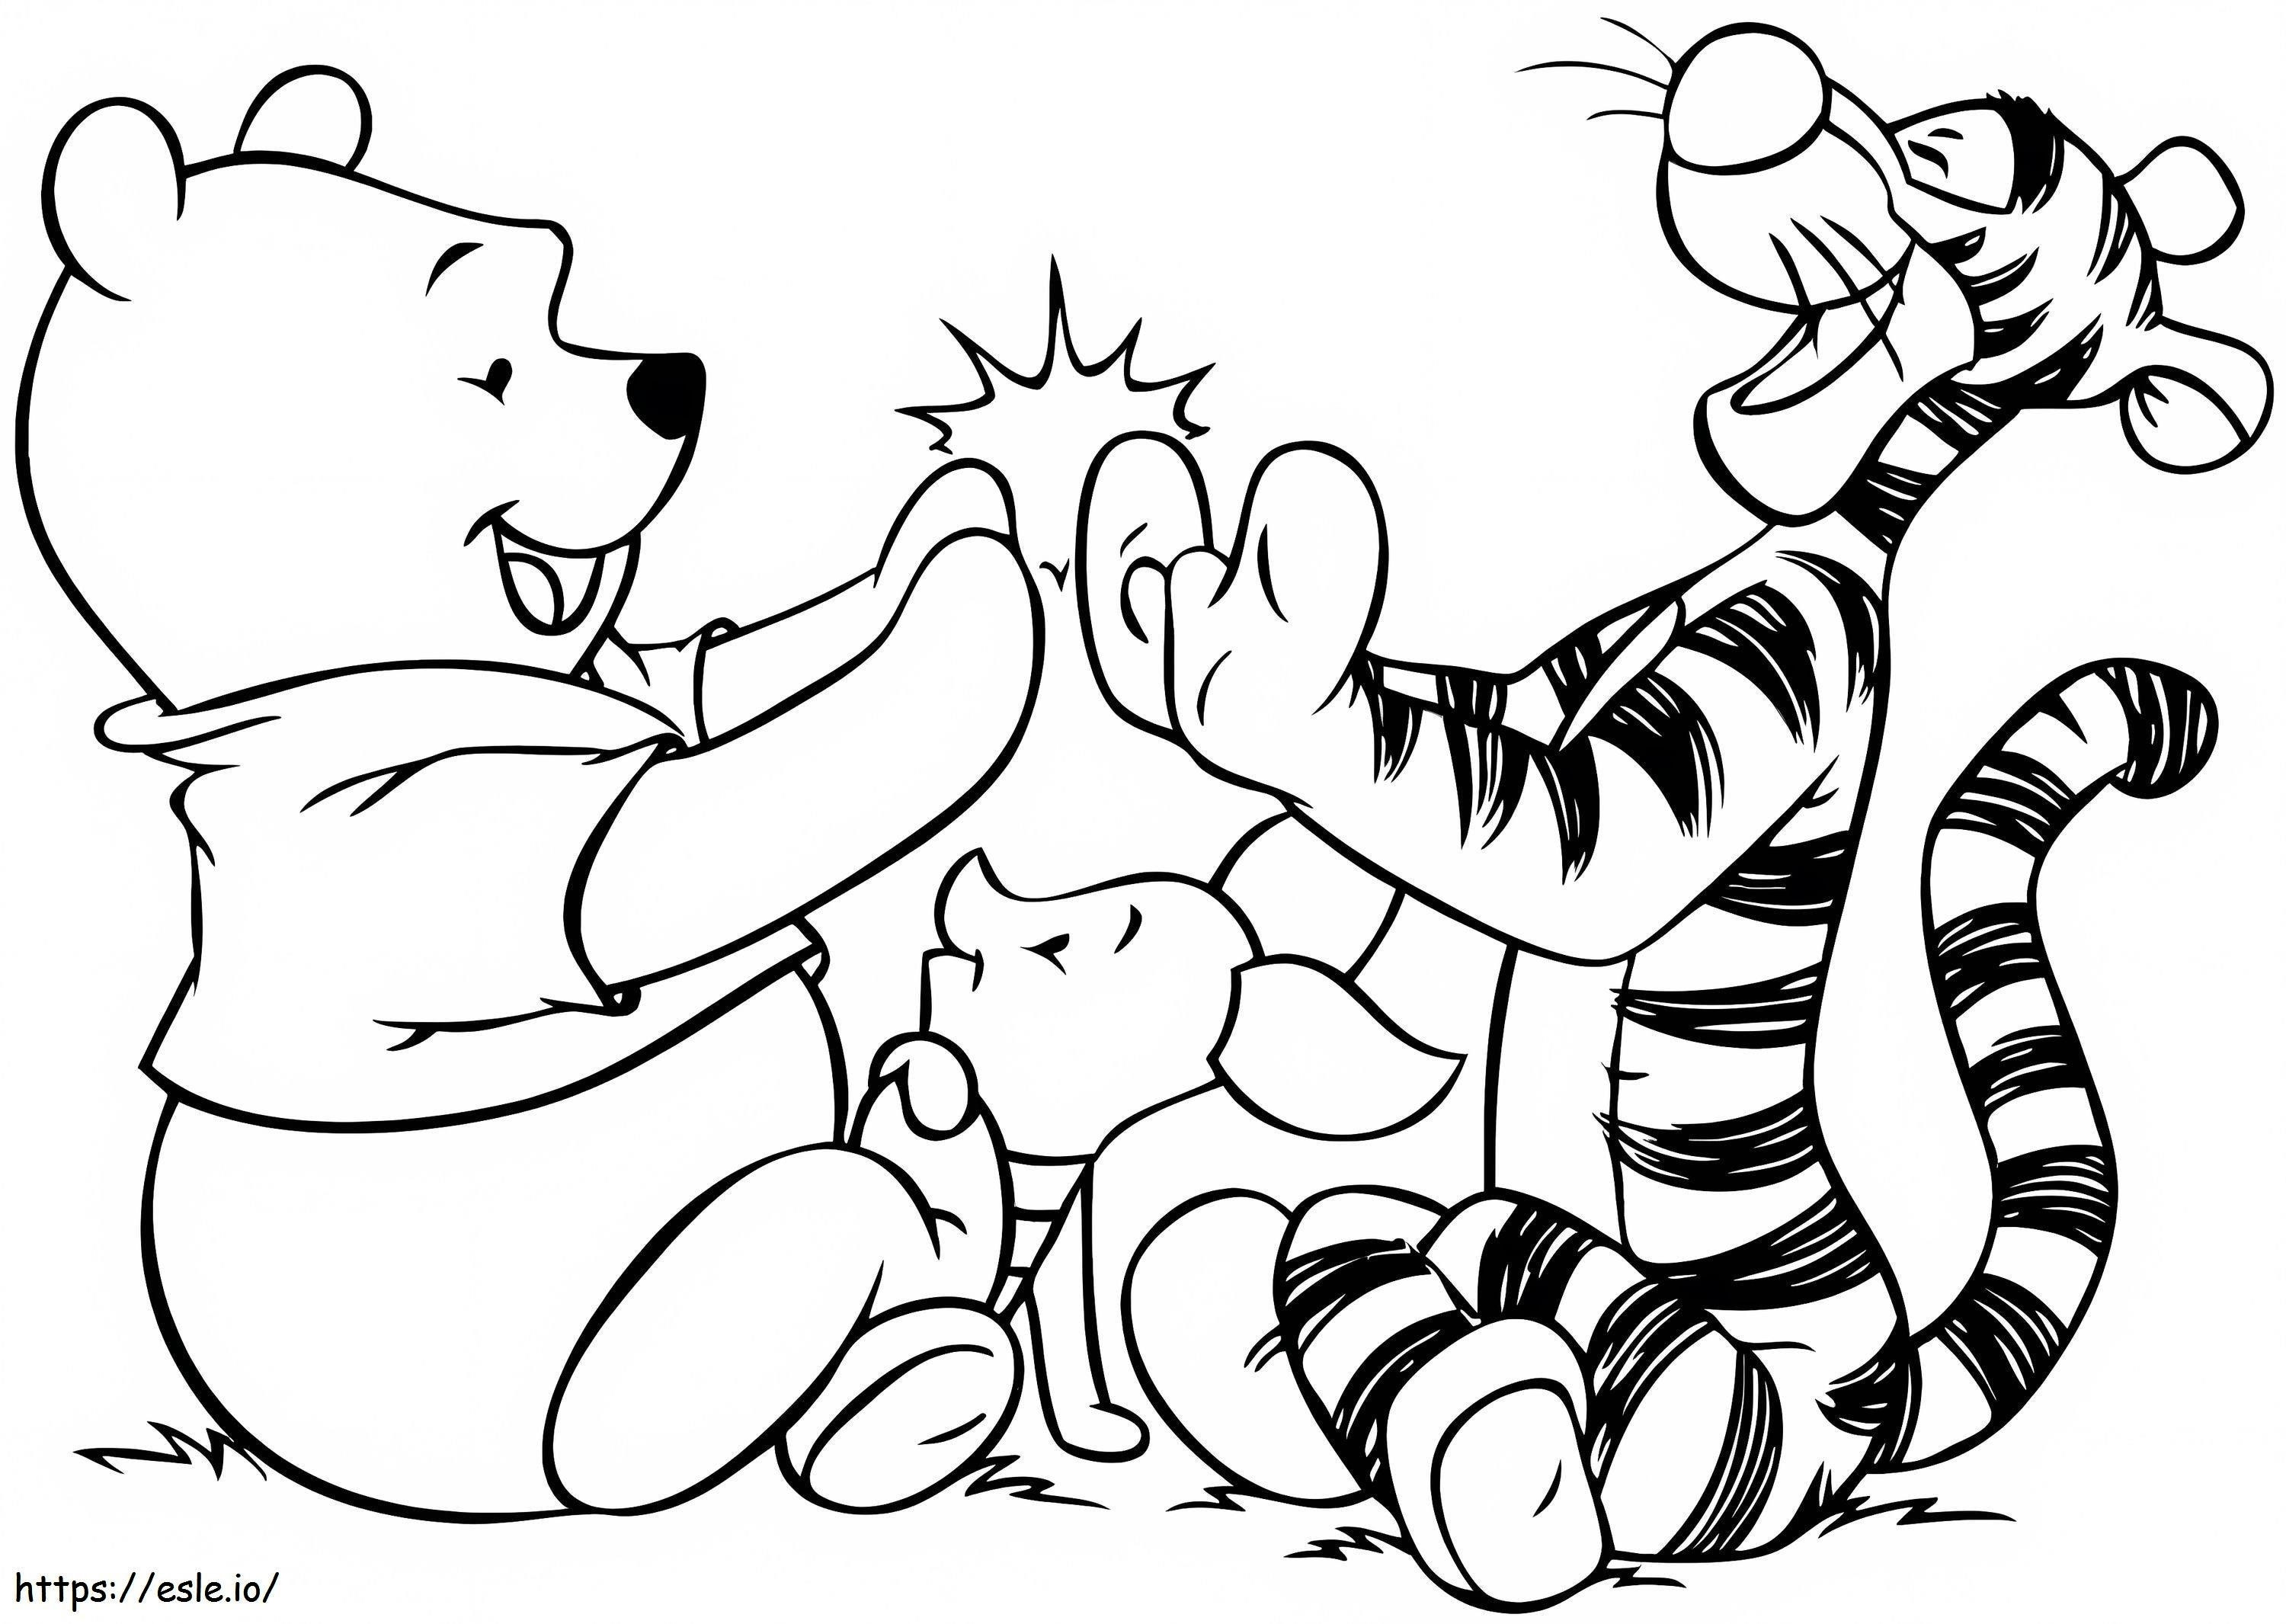 Winnie From Pooh And Normal Friends coloring page